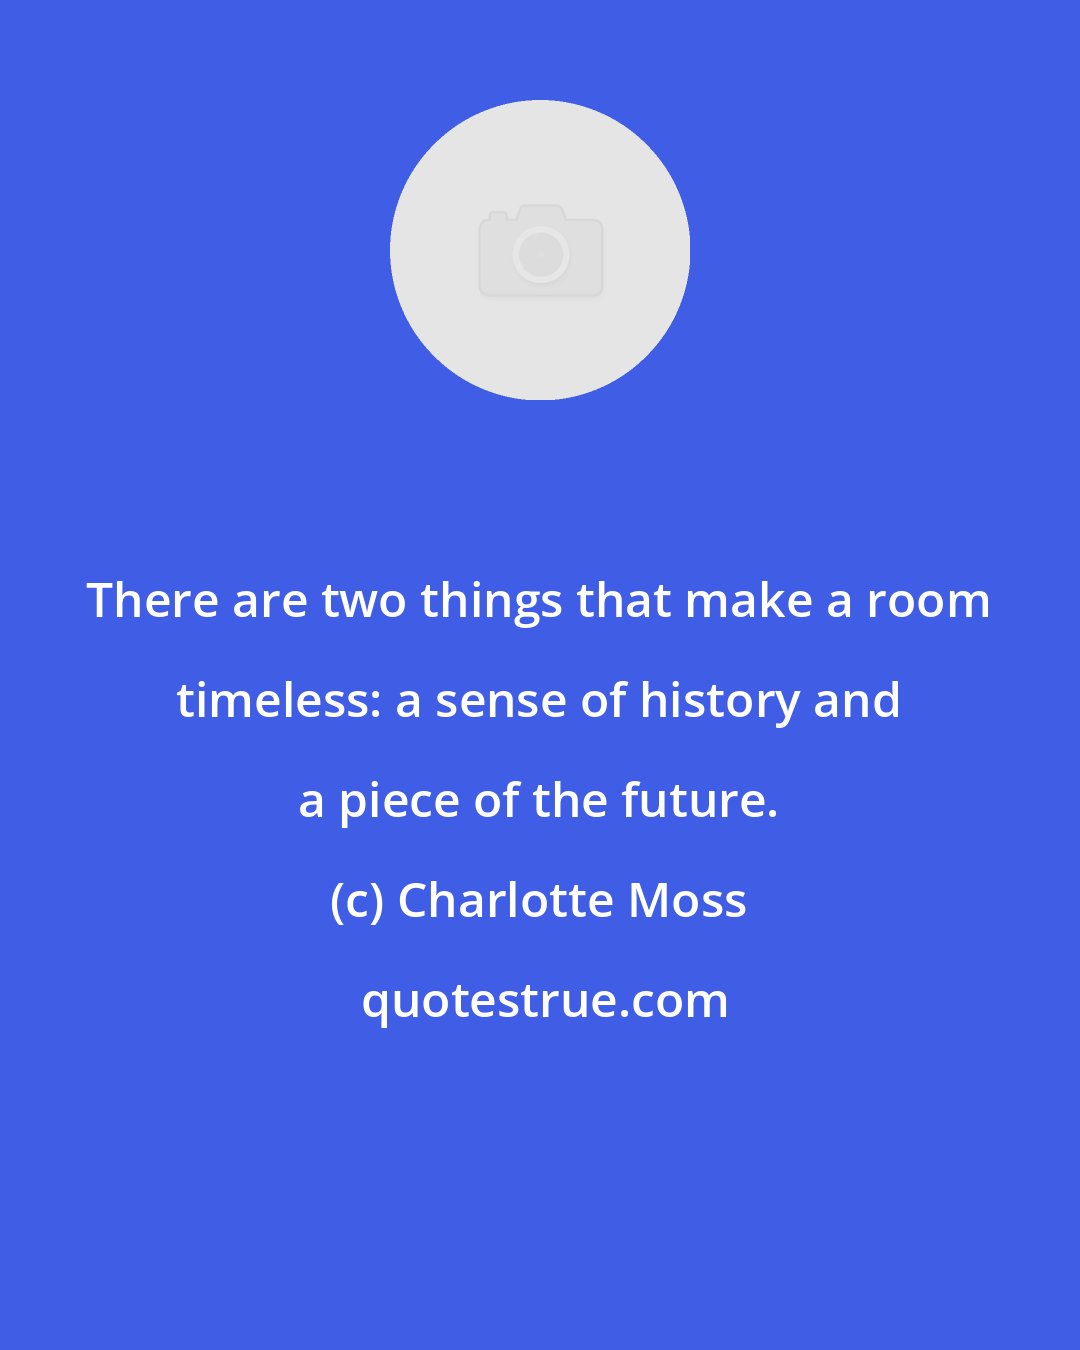 Charlotte Moss: There are two things that make a room timeless: a sense of history and a piece of the future.